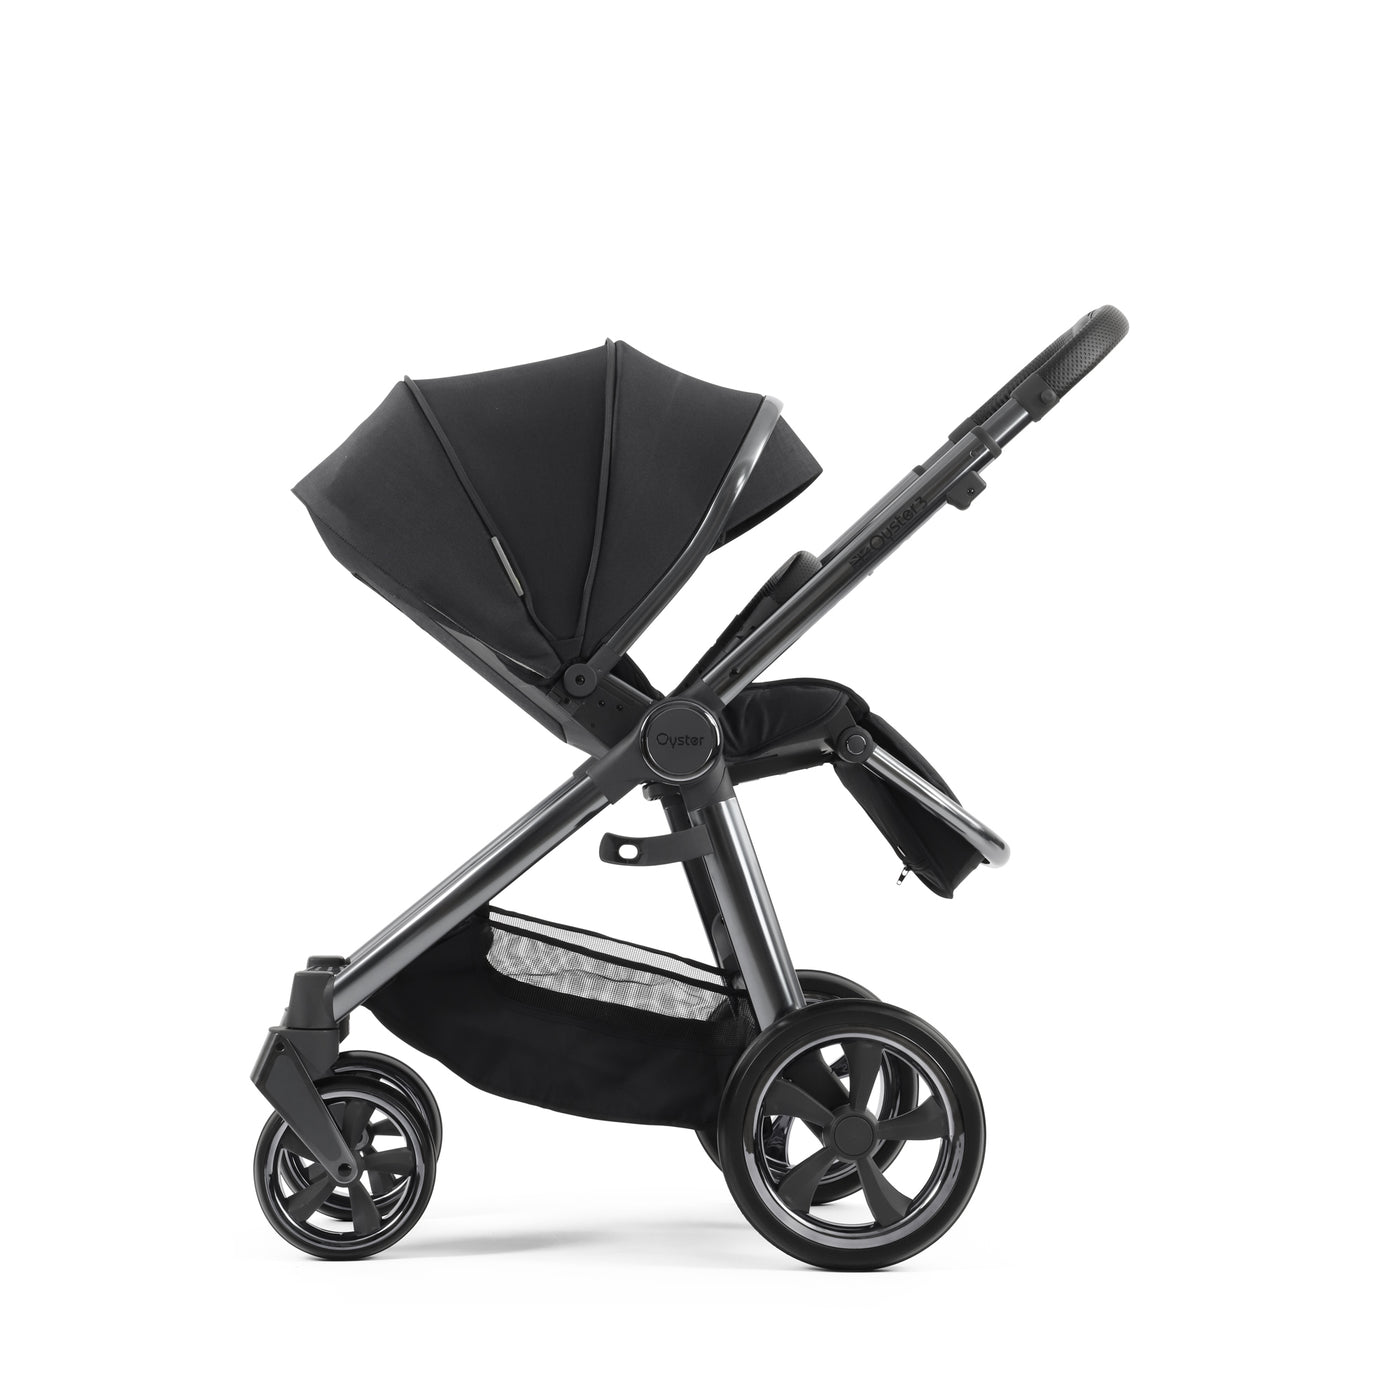 Babystyle Oyster 3 Pushchair - Carbonite